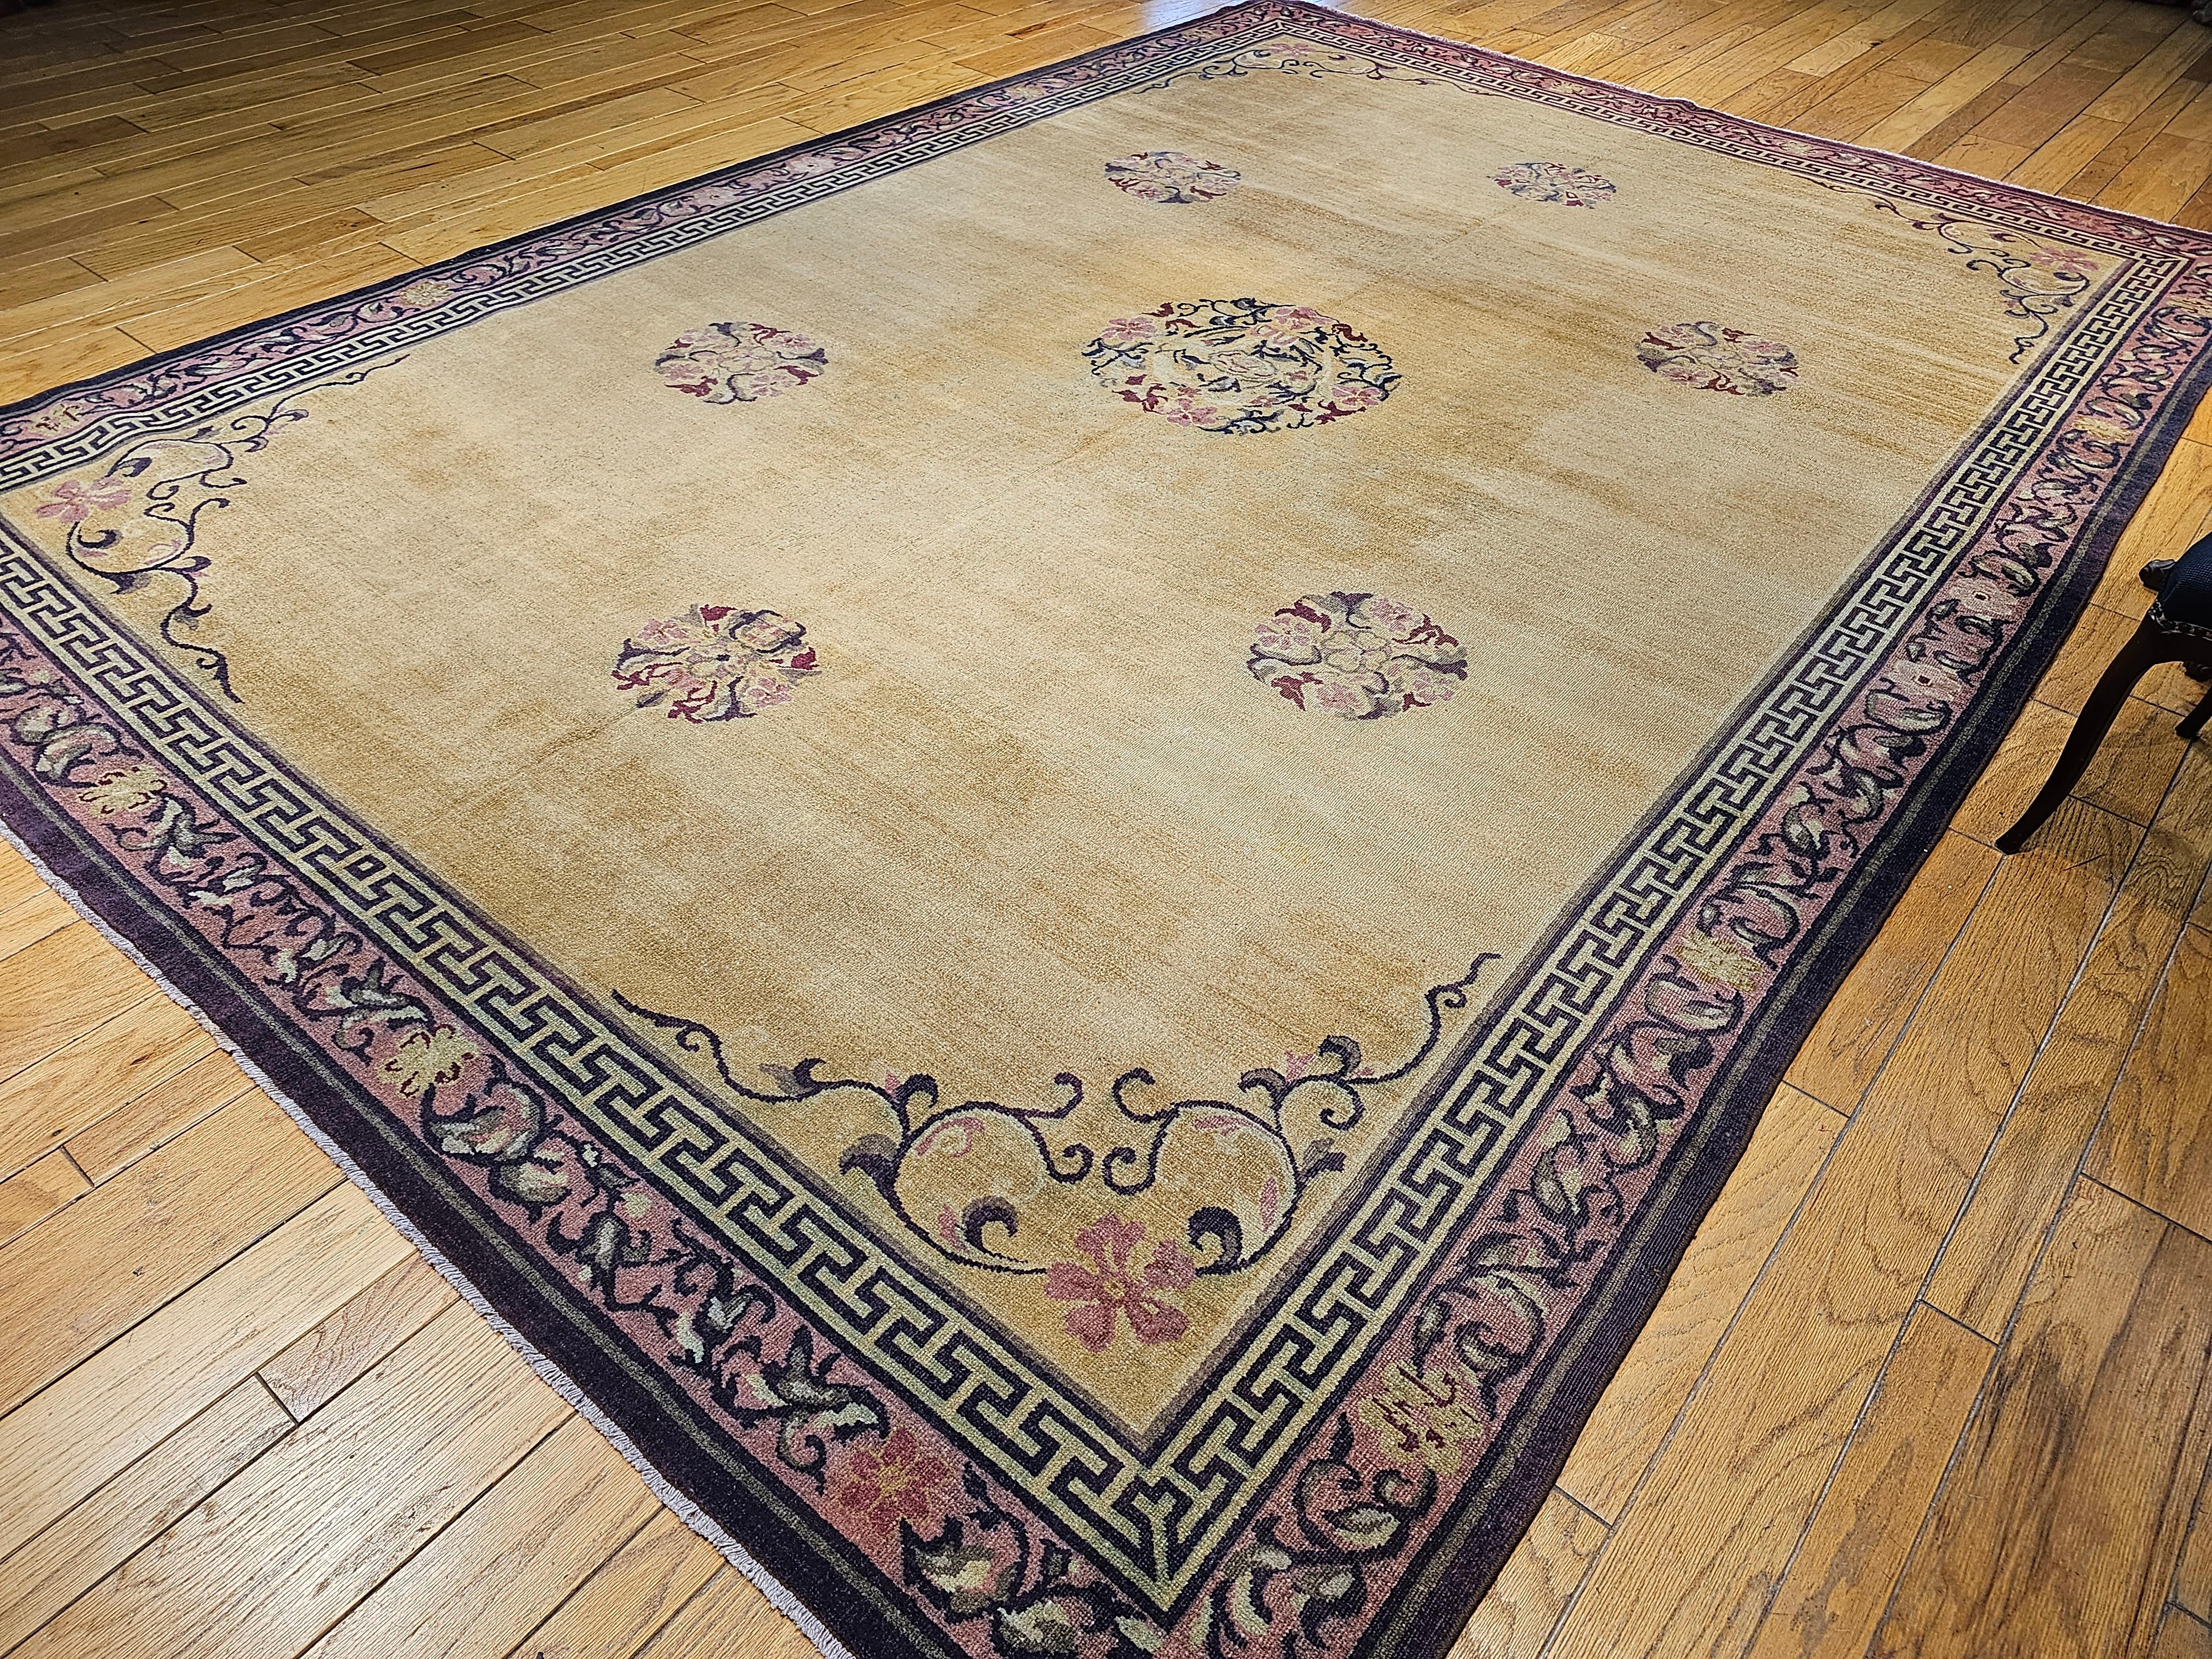 Early 1900s Room Size Indian Agra in Wheat, Burgundy, Olive Green, Brown, Pink For Sale 7